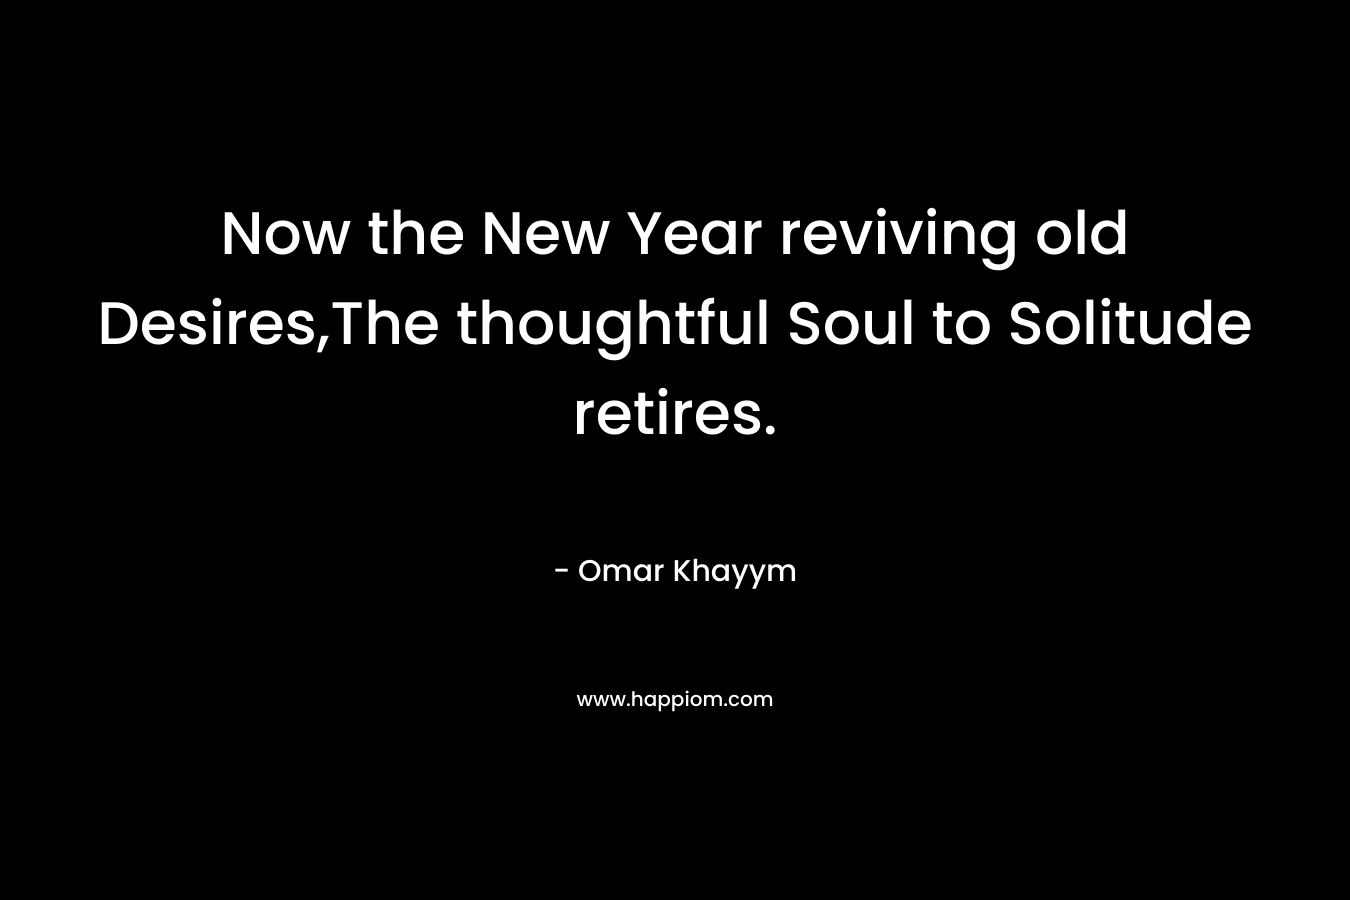 Now the New Year reviving old Desires,The thoughtful Soul to Solitude retires.